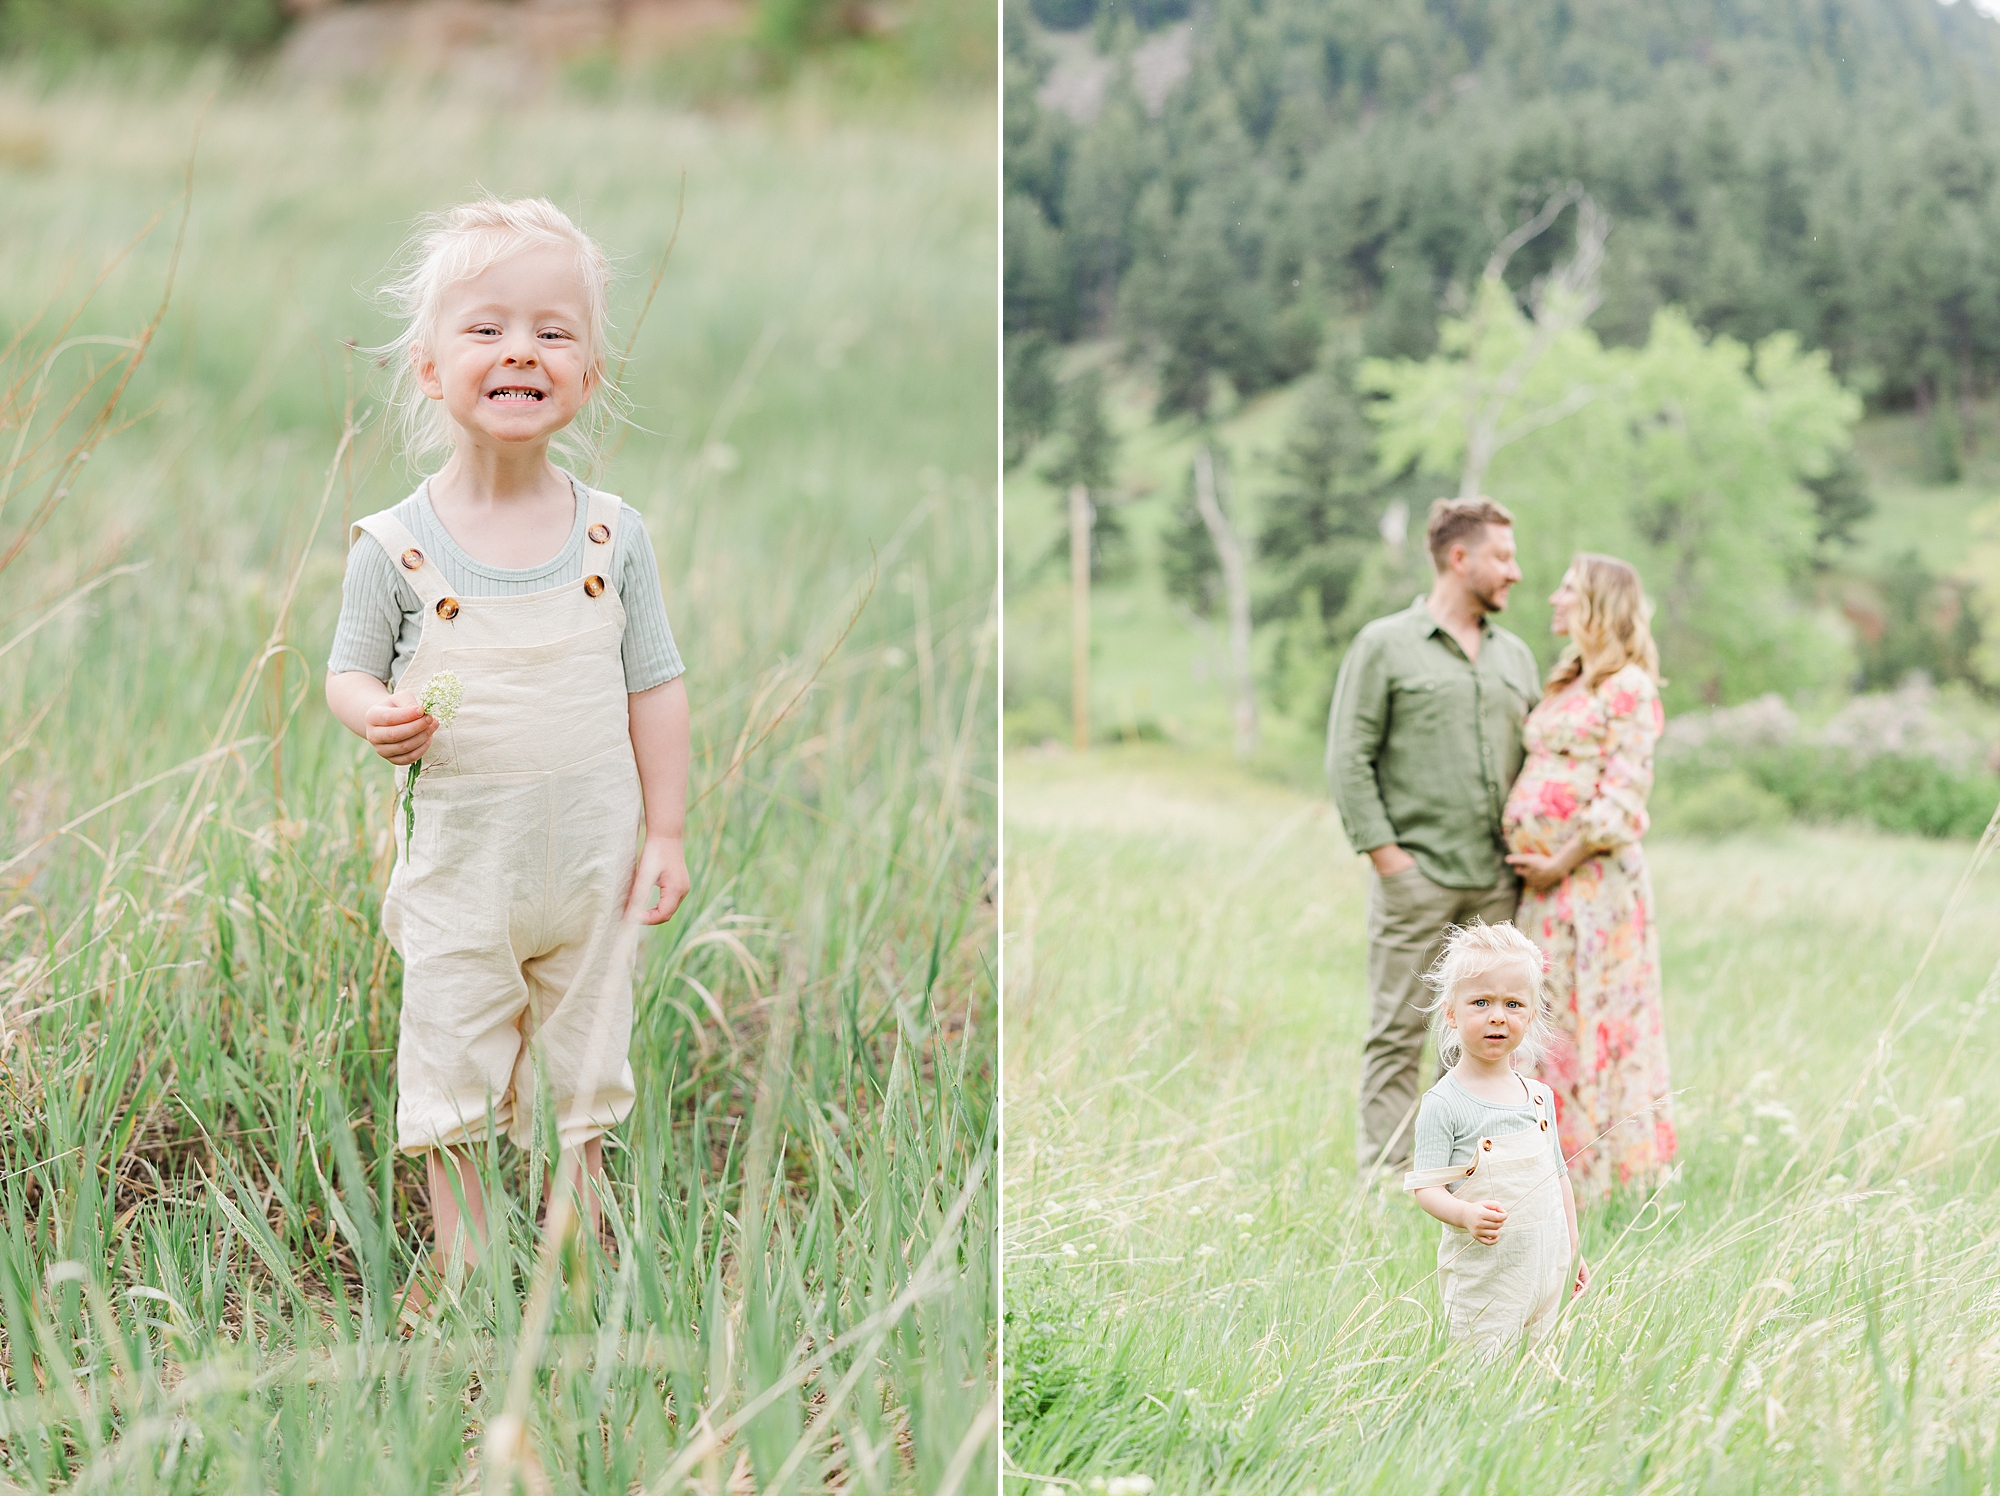 Buckingham Park Summer Maternity Session Boulder, CO in the tall grass